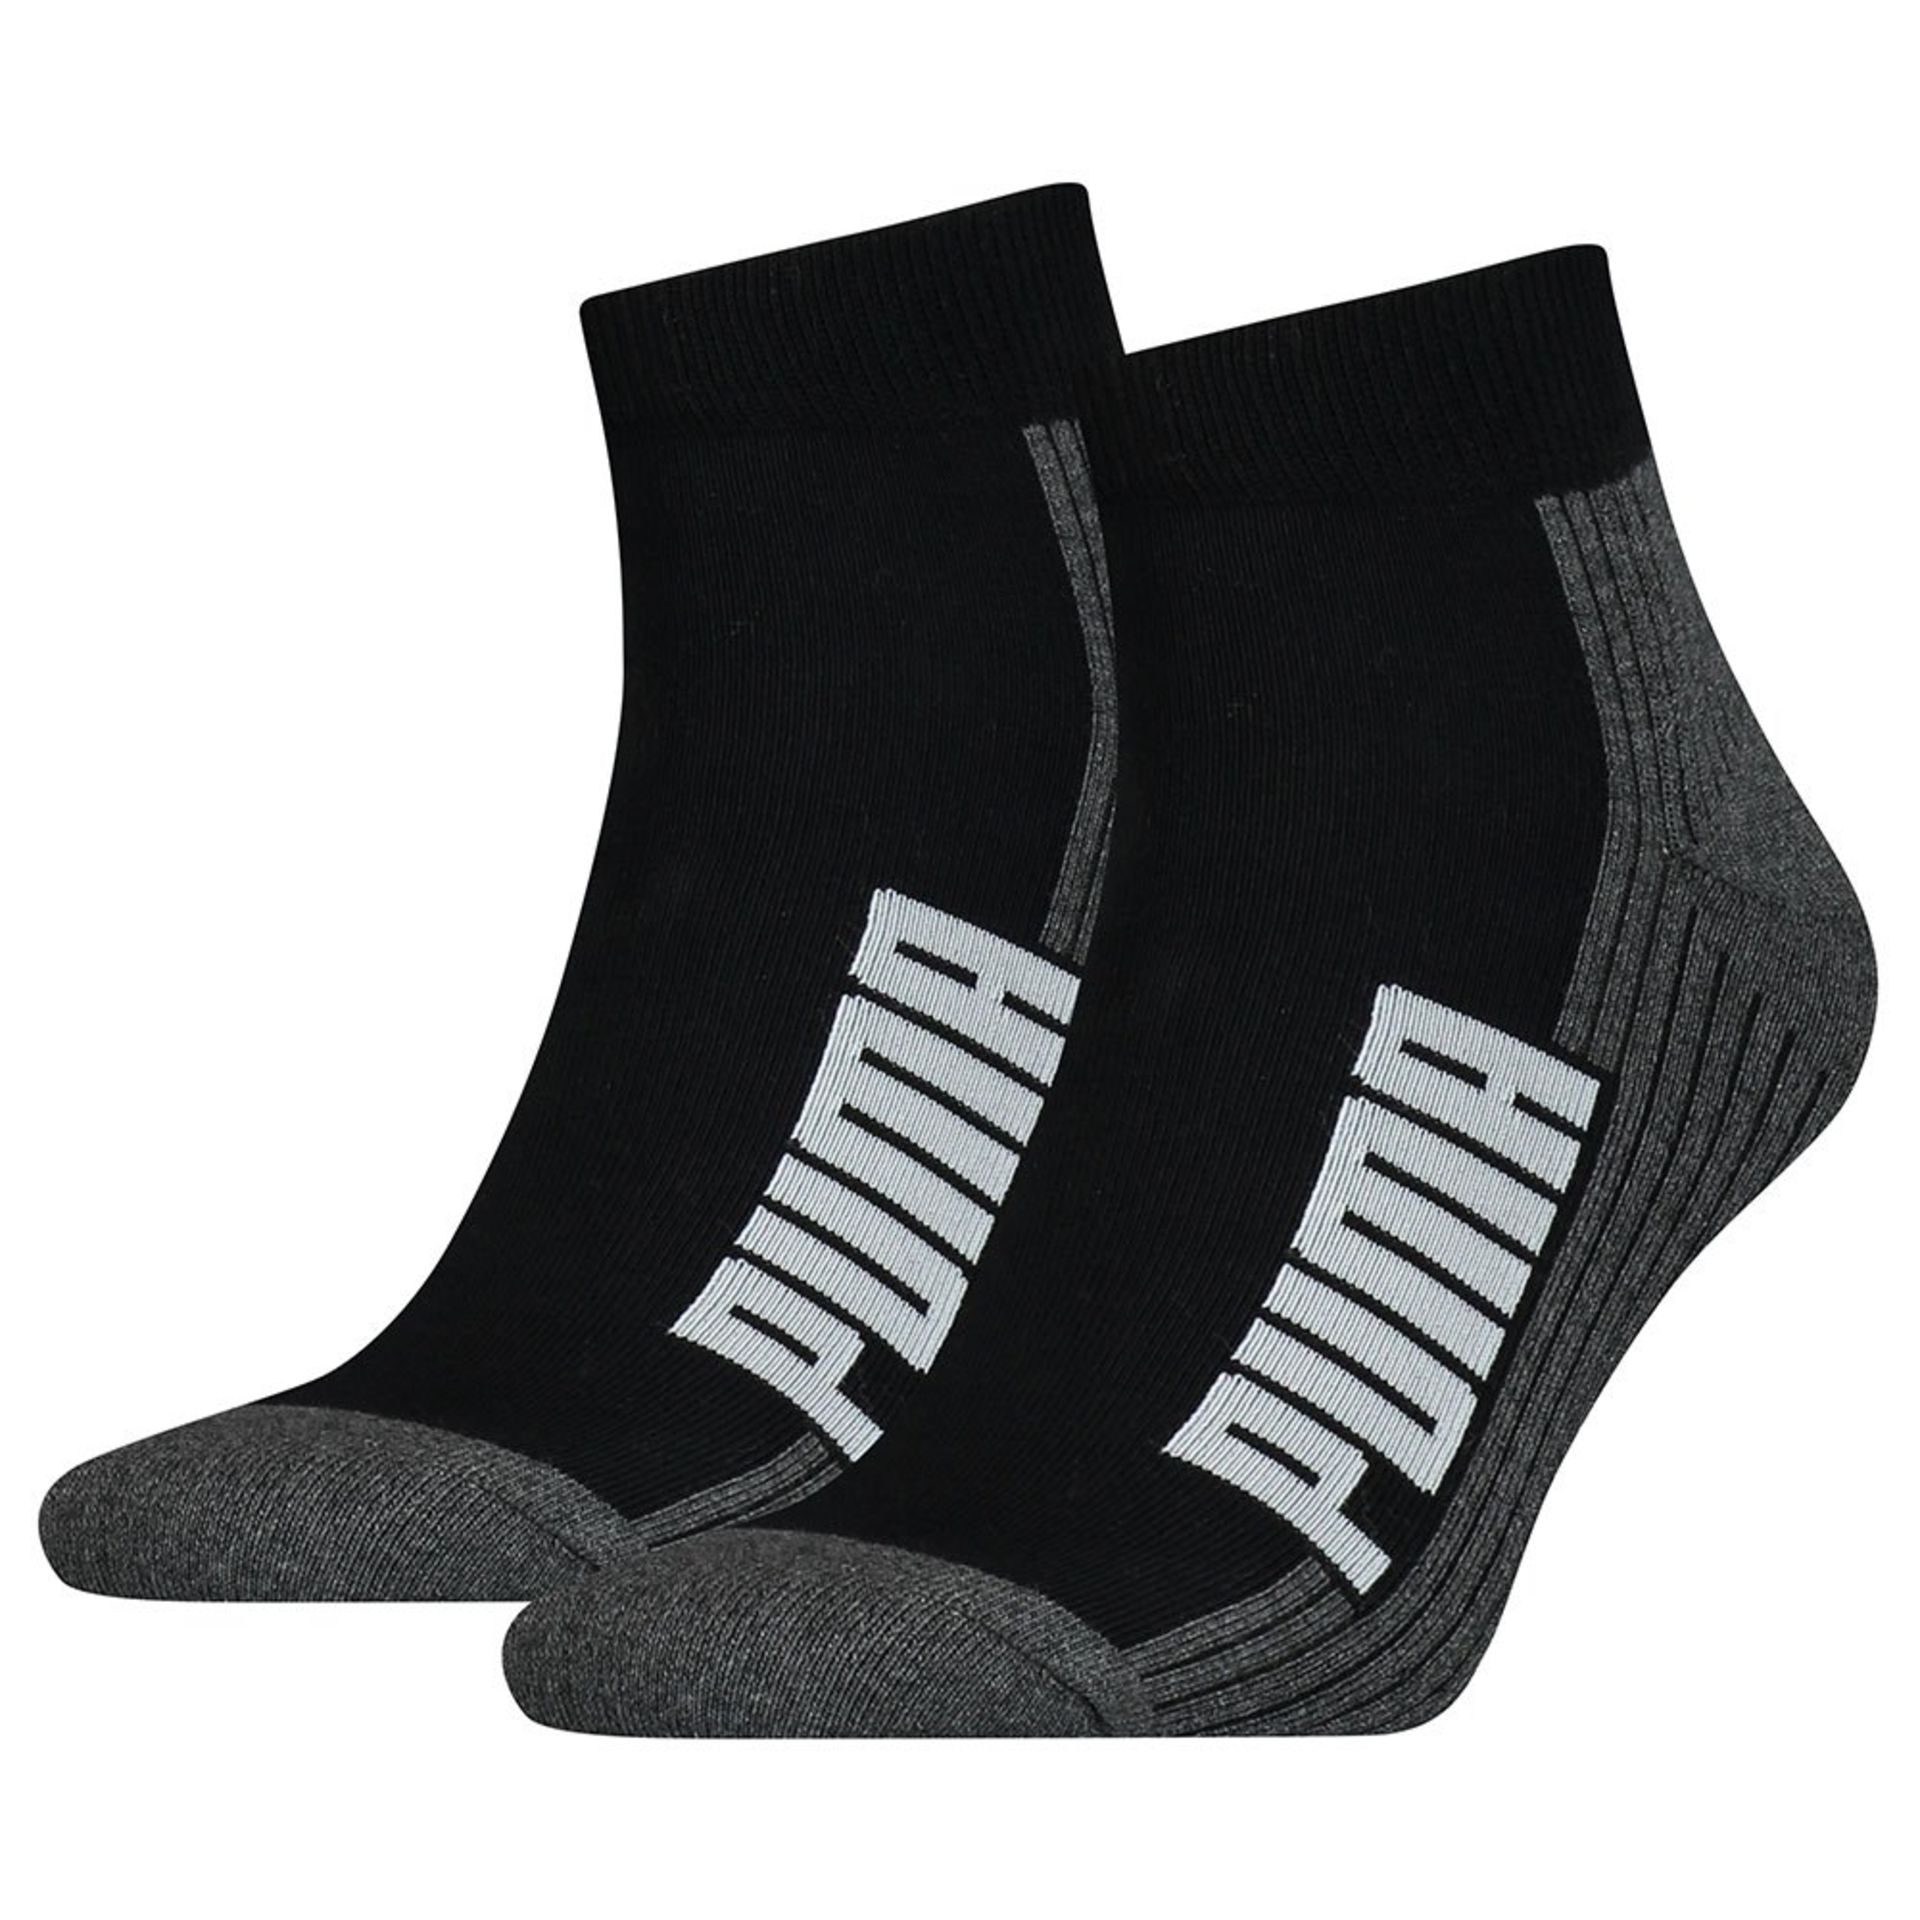 Puma 2 Pack Quarter Socks Size 2.5-5(Delivery Band A)